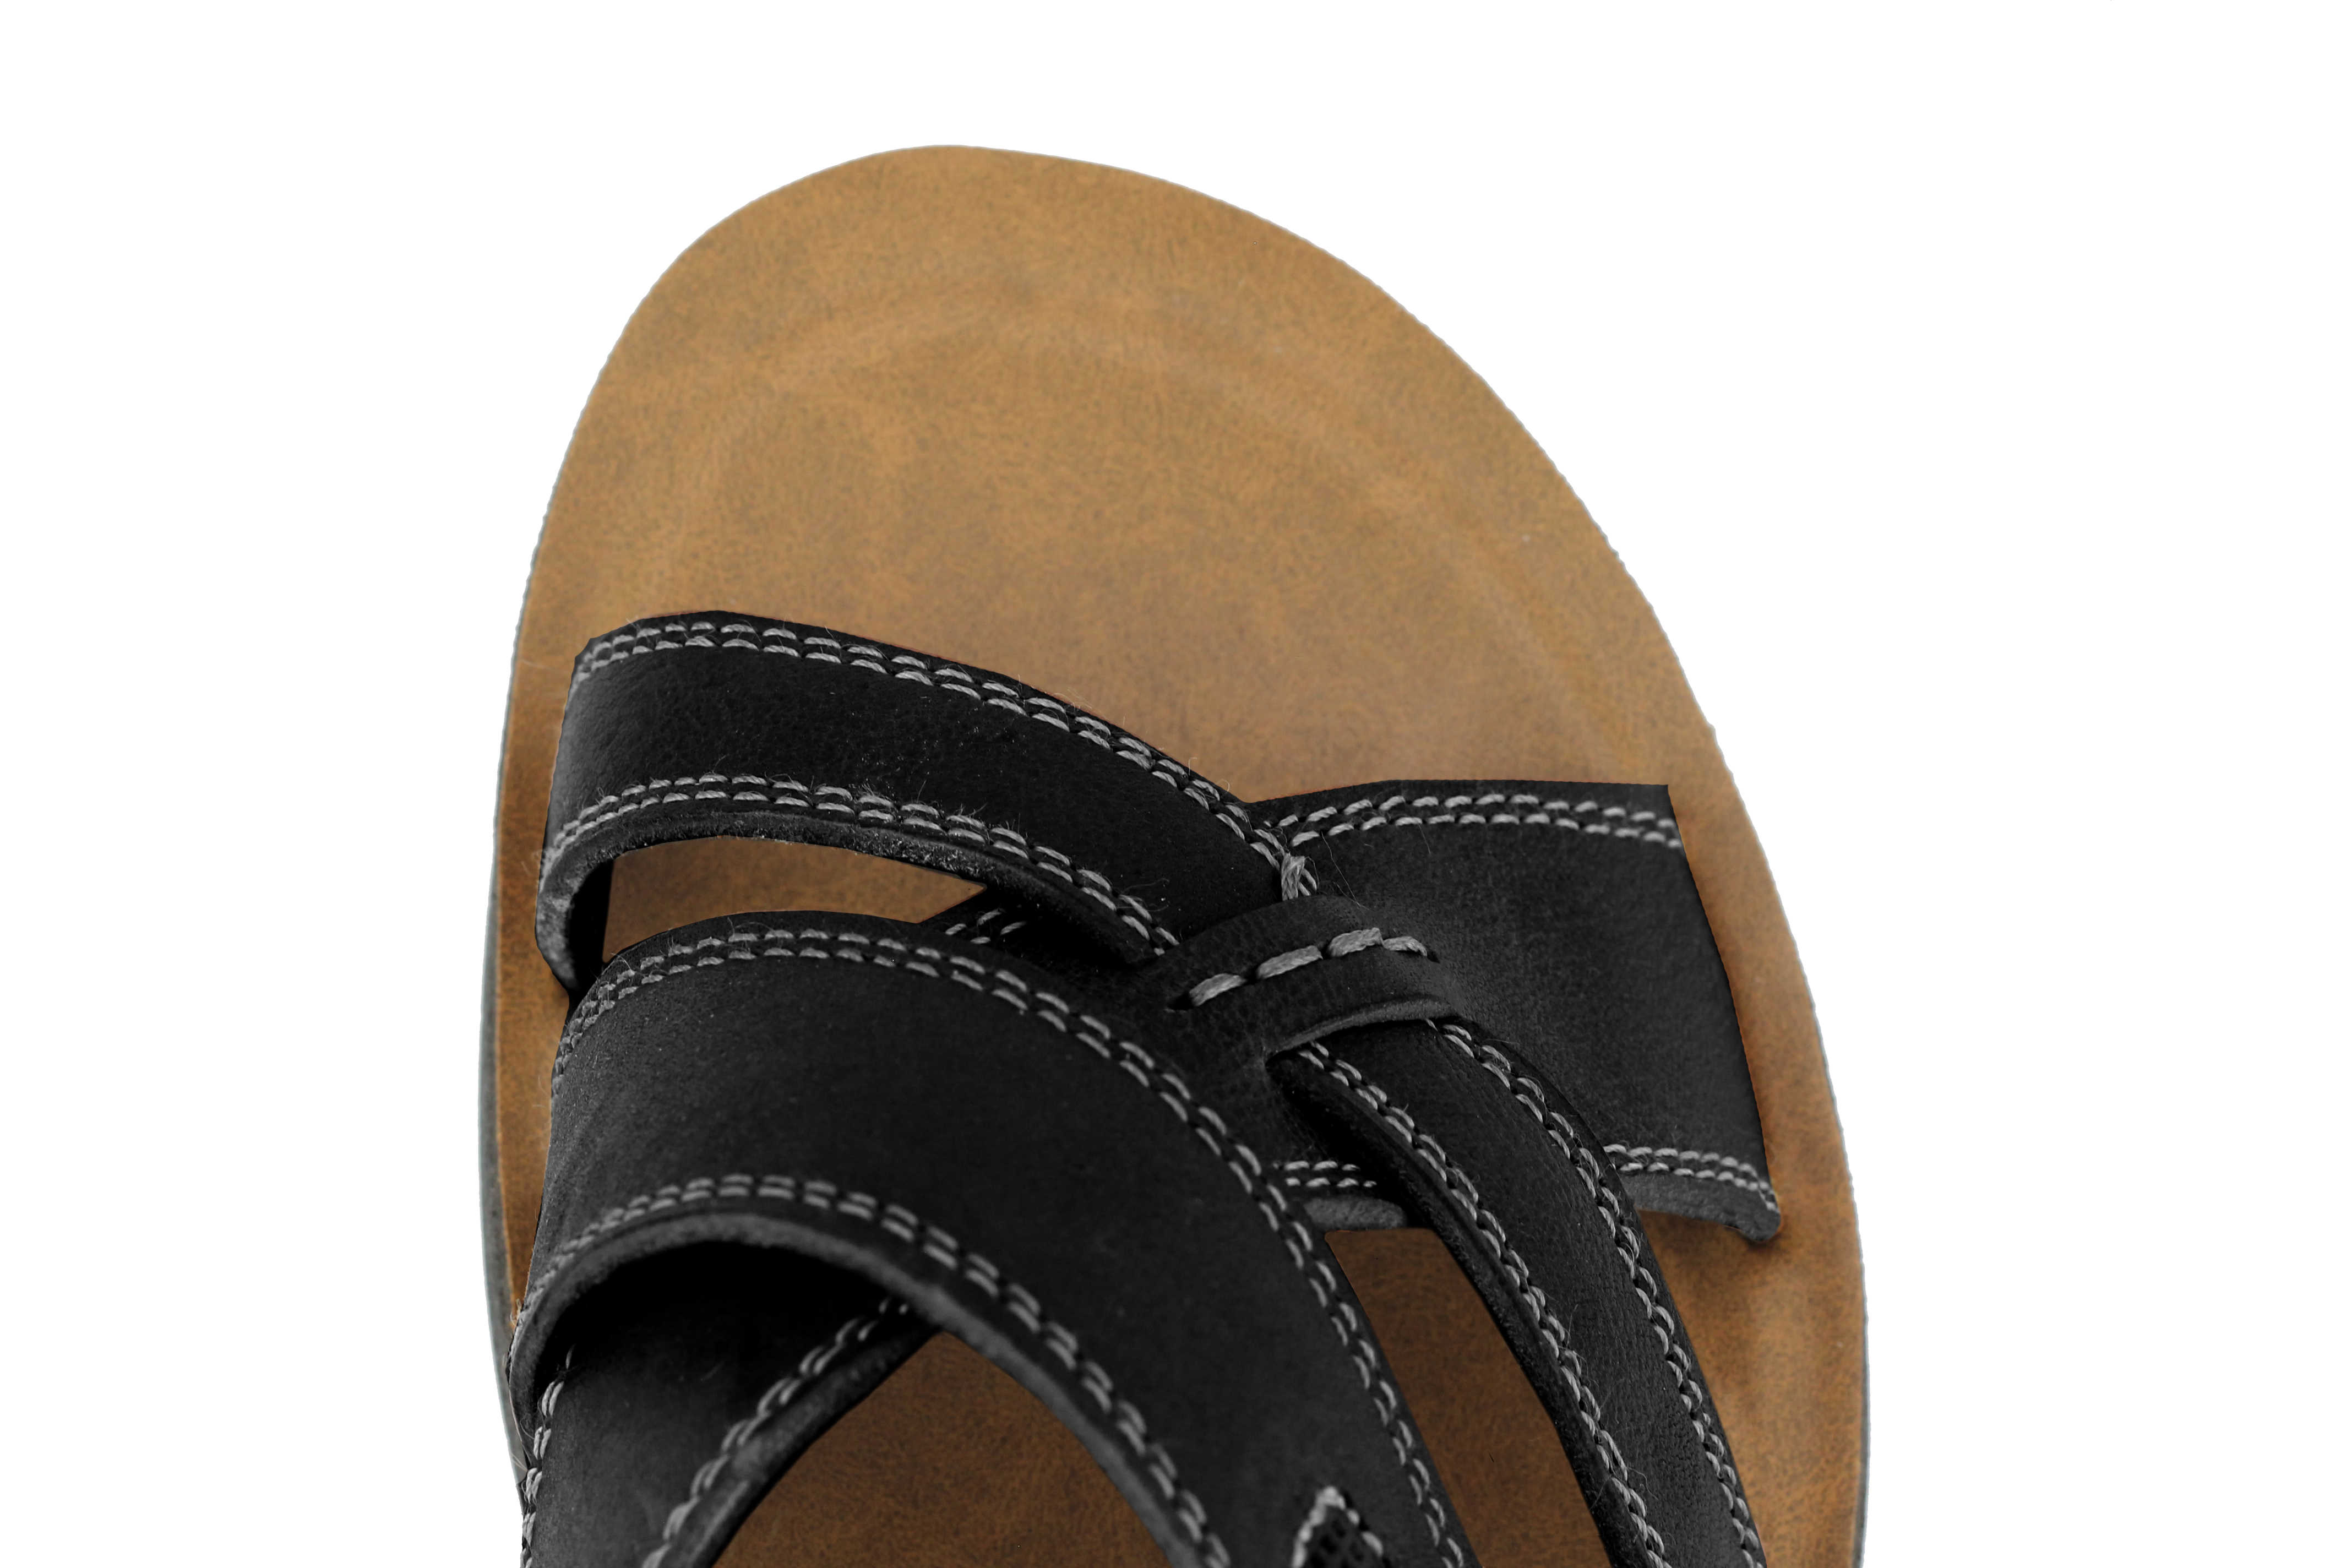 Mens Leather Sandals Black Tan Crossover Strap Summer Holiday Slip on ...